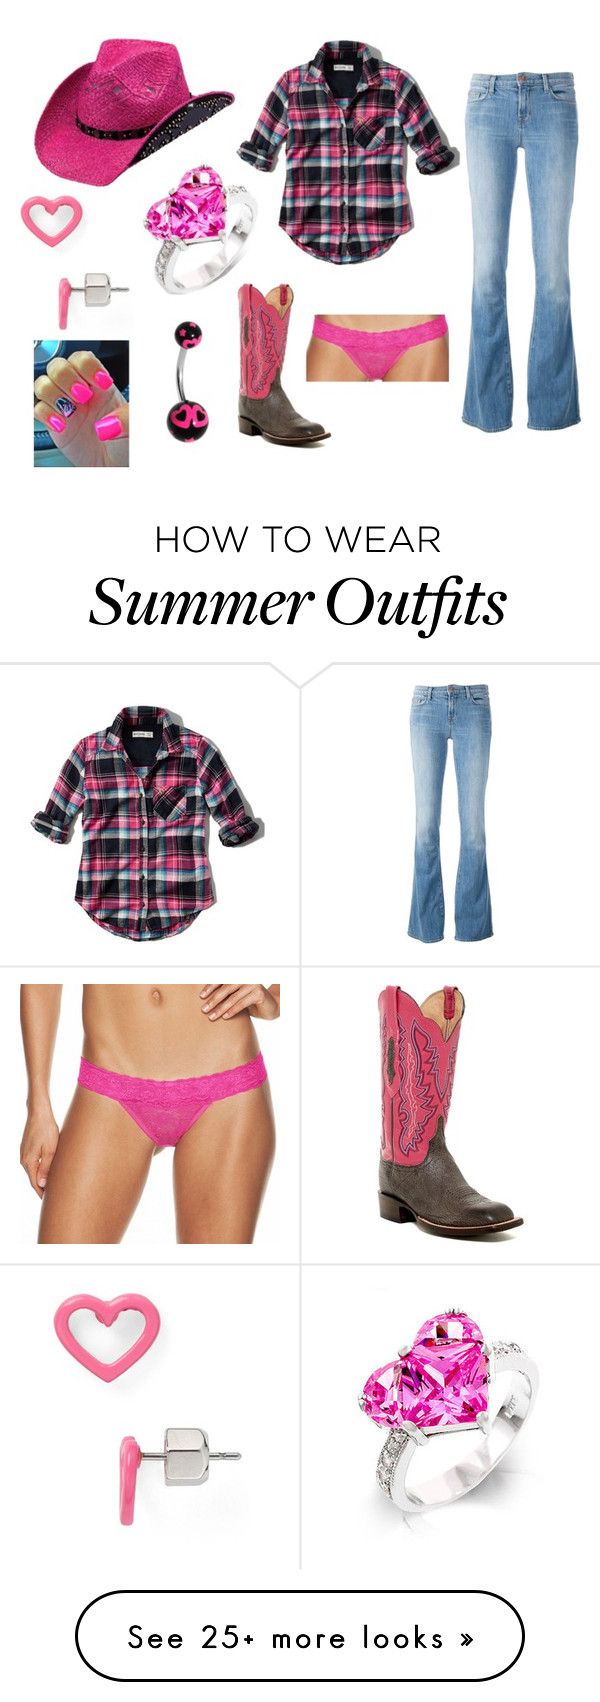 "Hoyt hearts this outfit" by ravenrebelle on Polyvore featuring Abercr...